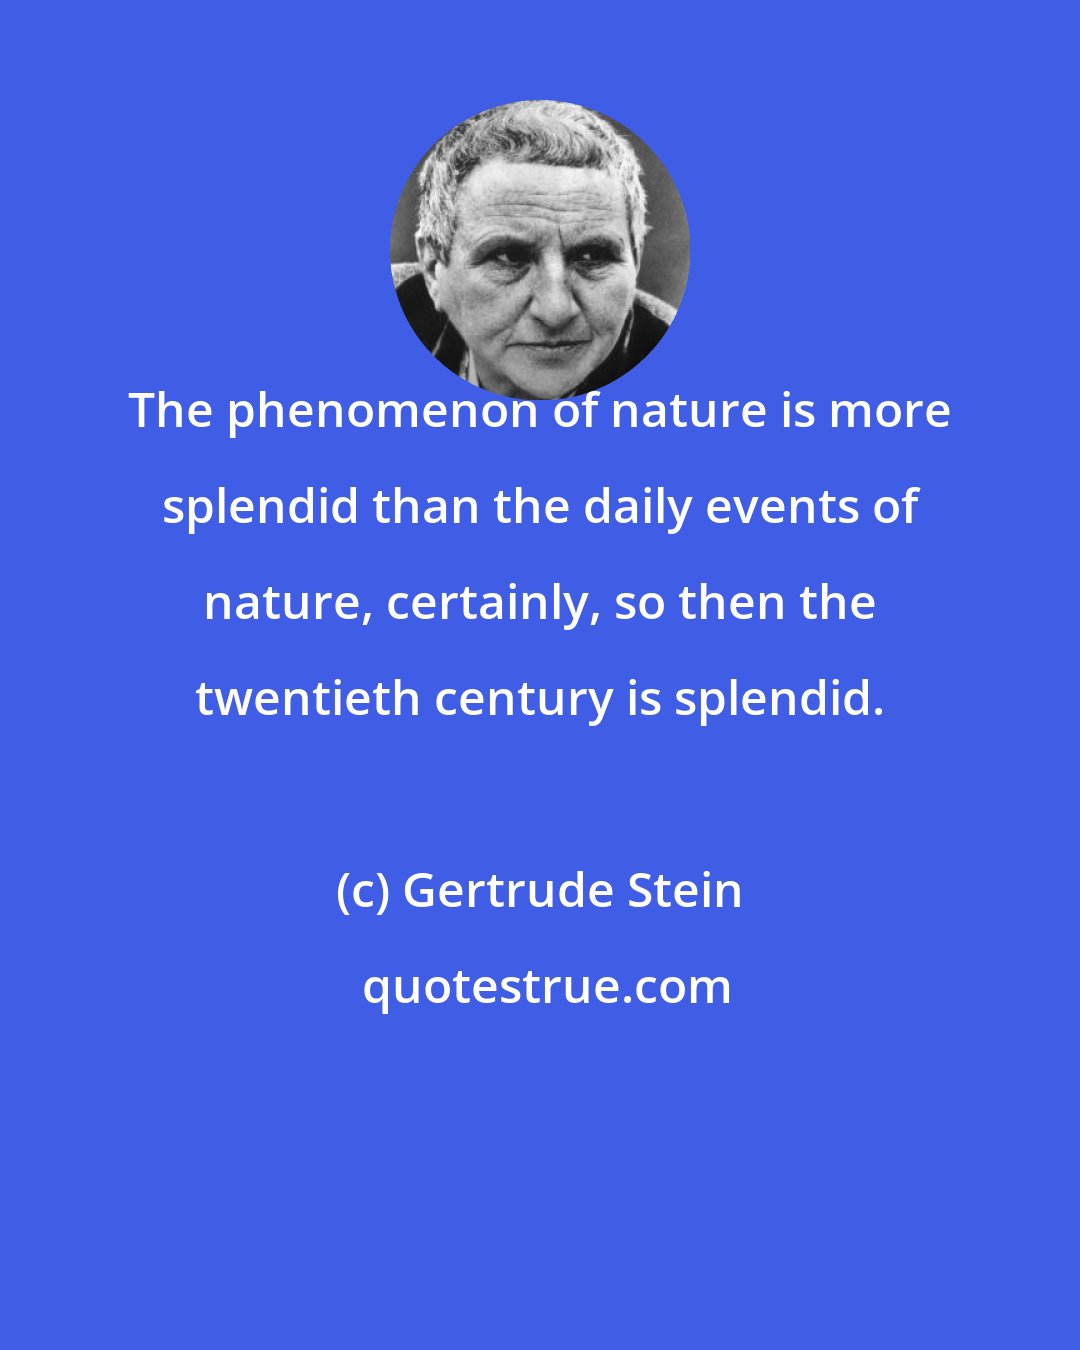 Gertrude Stein: The phenomenon of nature is more splendid than the daily events of nature, certainly, so then the twentieth century is splendid.